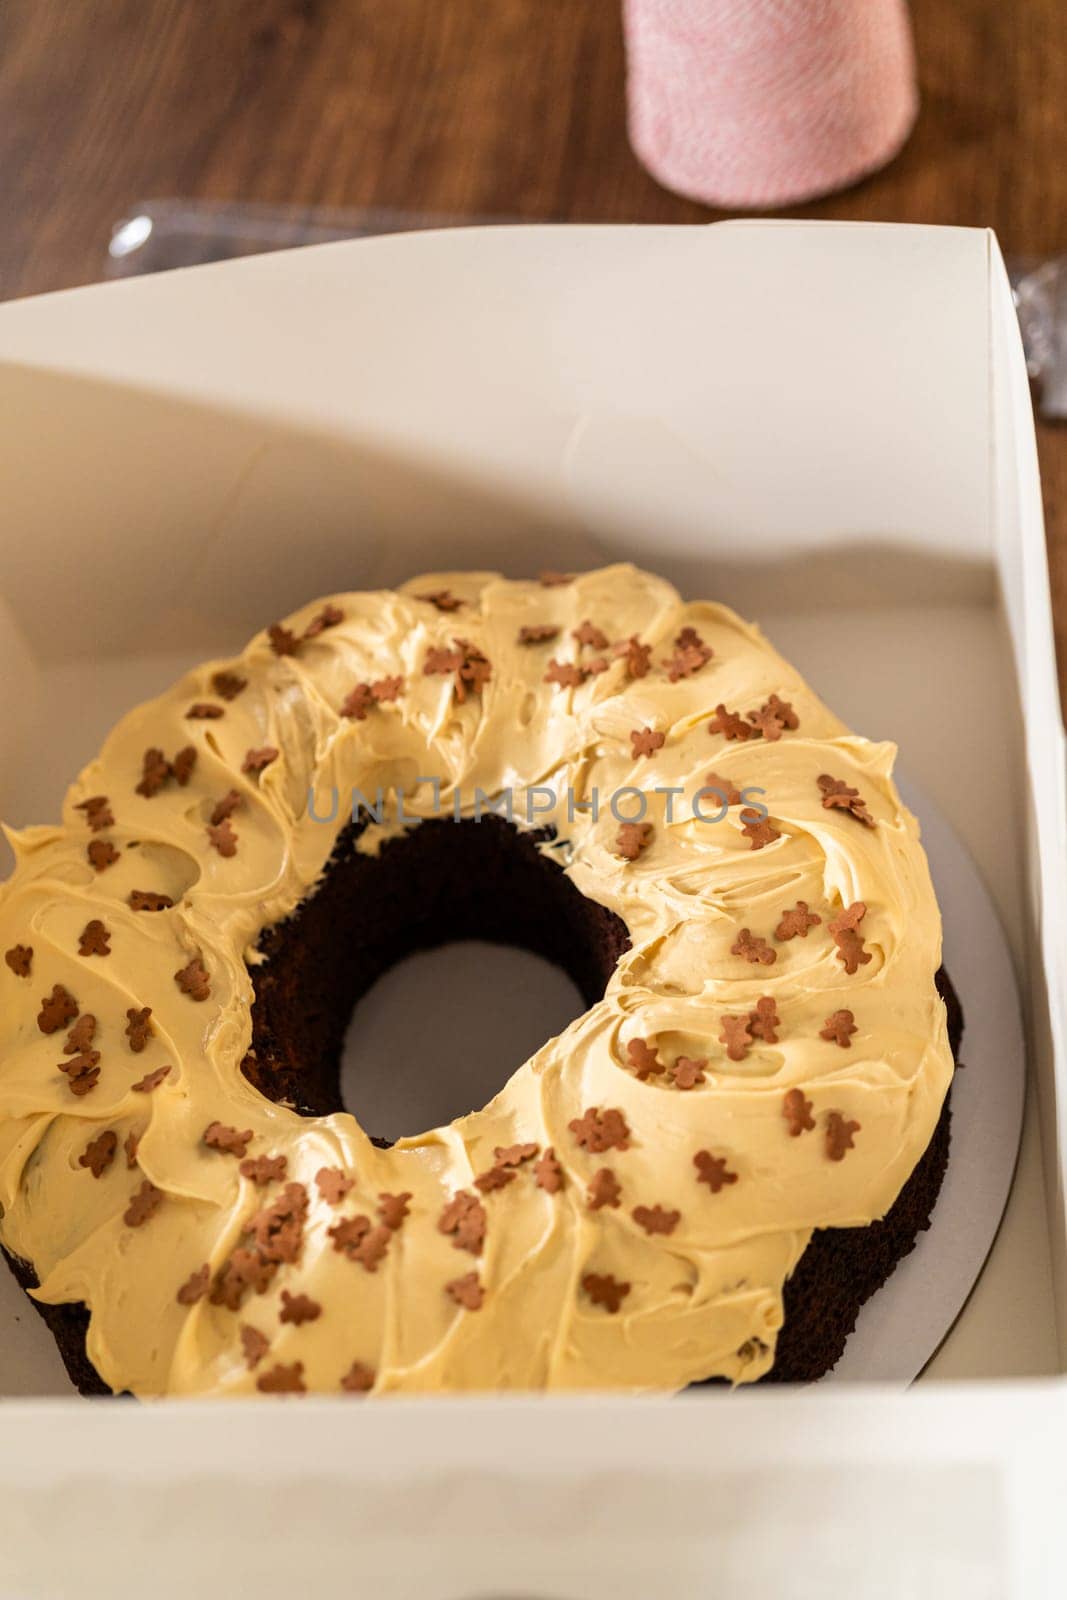 Baking Gingerbread Bundt Cake with Caramel Frosting Ingredients by arinahabich